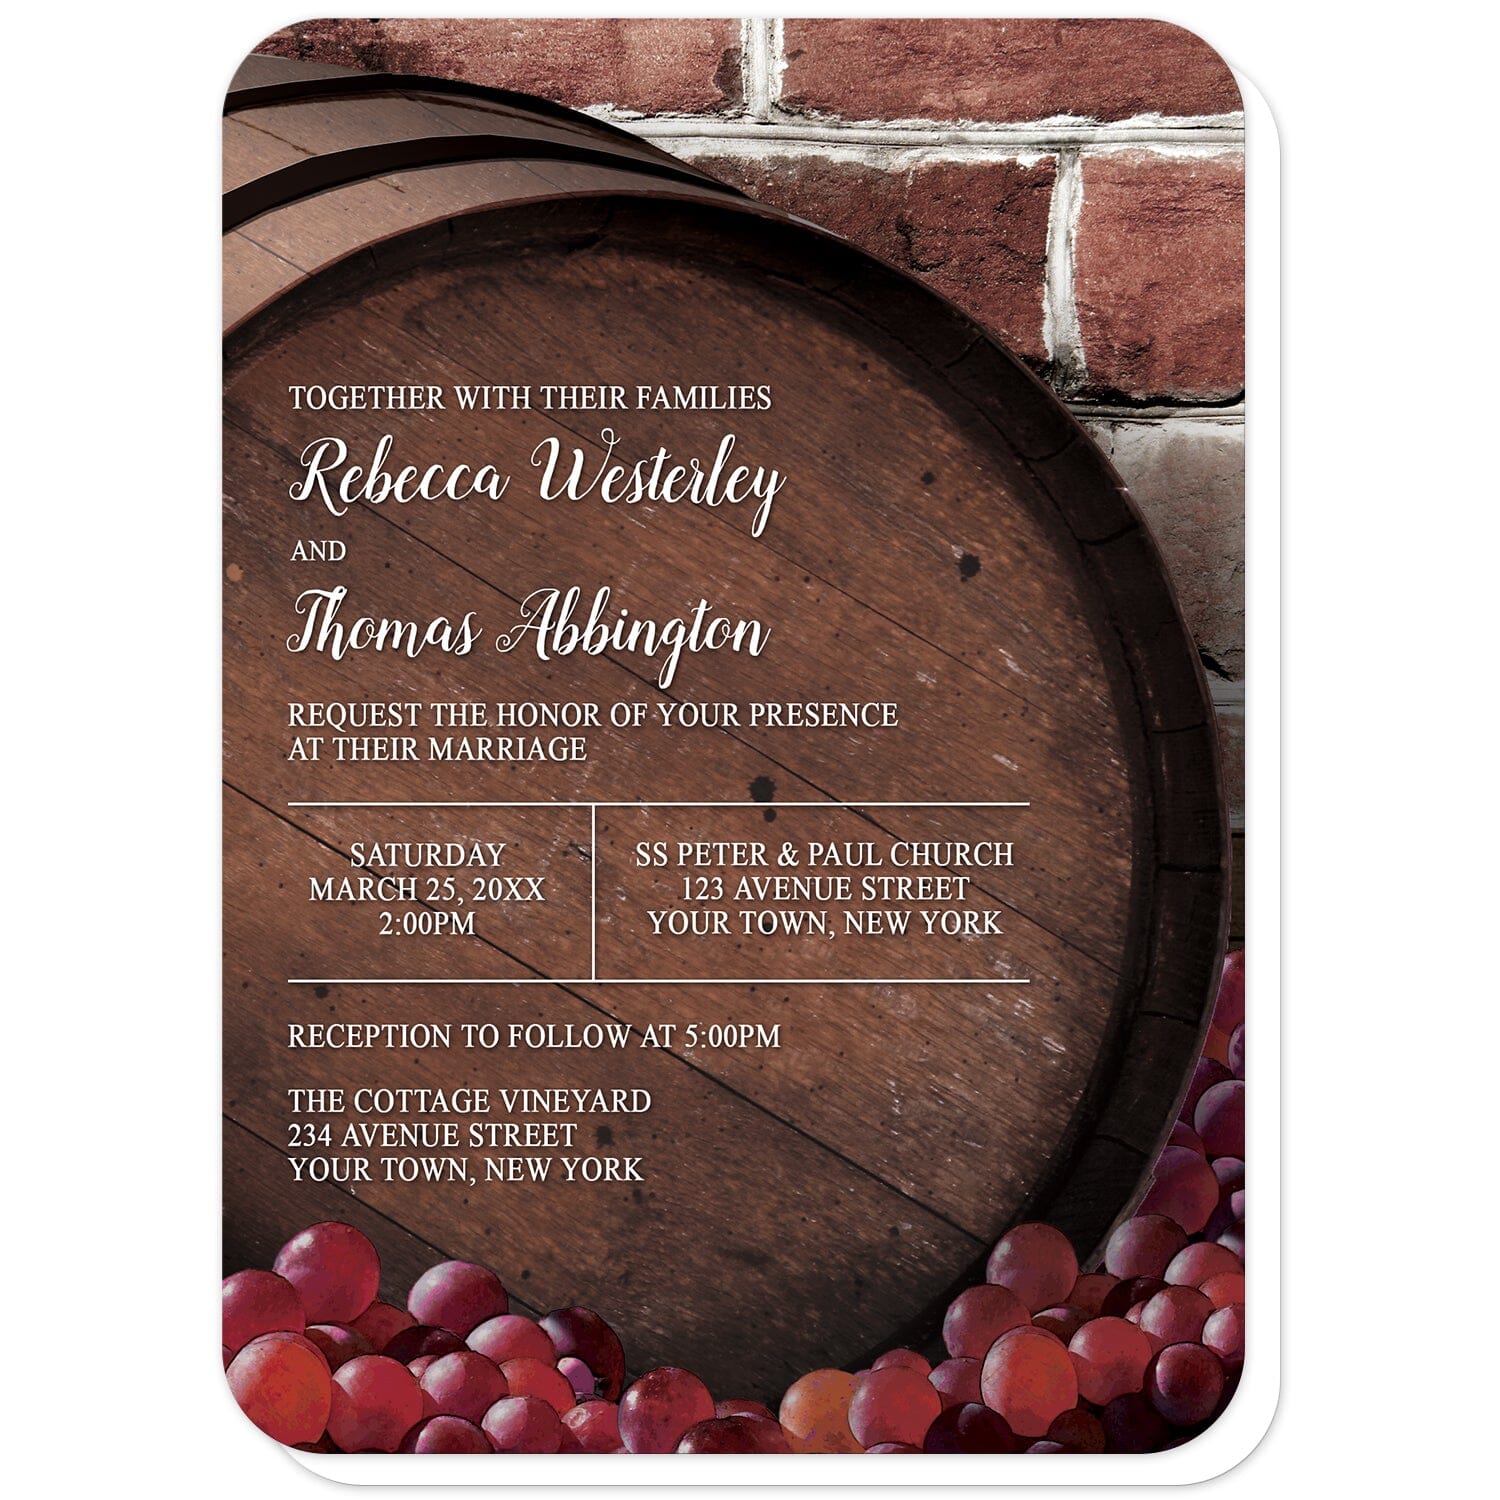 Rustic Wine Barrel Vineyard Wedding Invitations (with rounded corners) at Artistically Invited. Beautiful rustic wine barrel vineyard wedding invitations designed with a large wooden wine barrel and grapes illustration in front of a brick pattern background. Your personalized marriage celebration details are custom printed in white fonts and grid lines over the top side of the barrel.